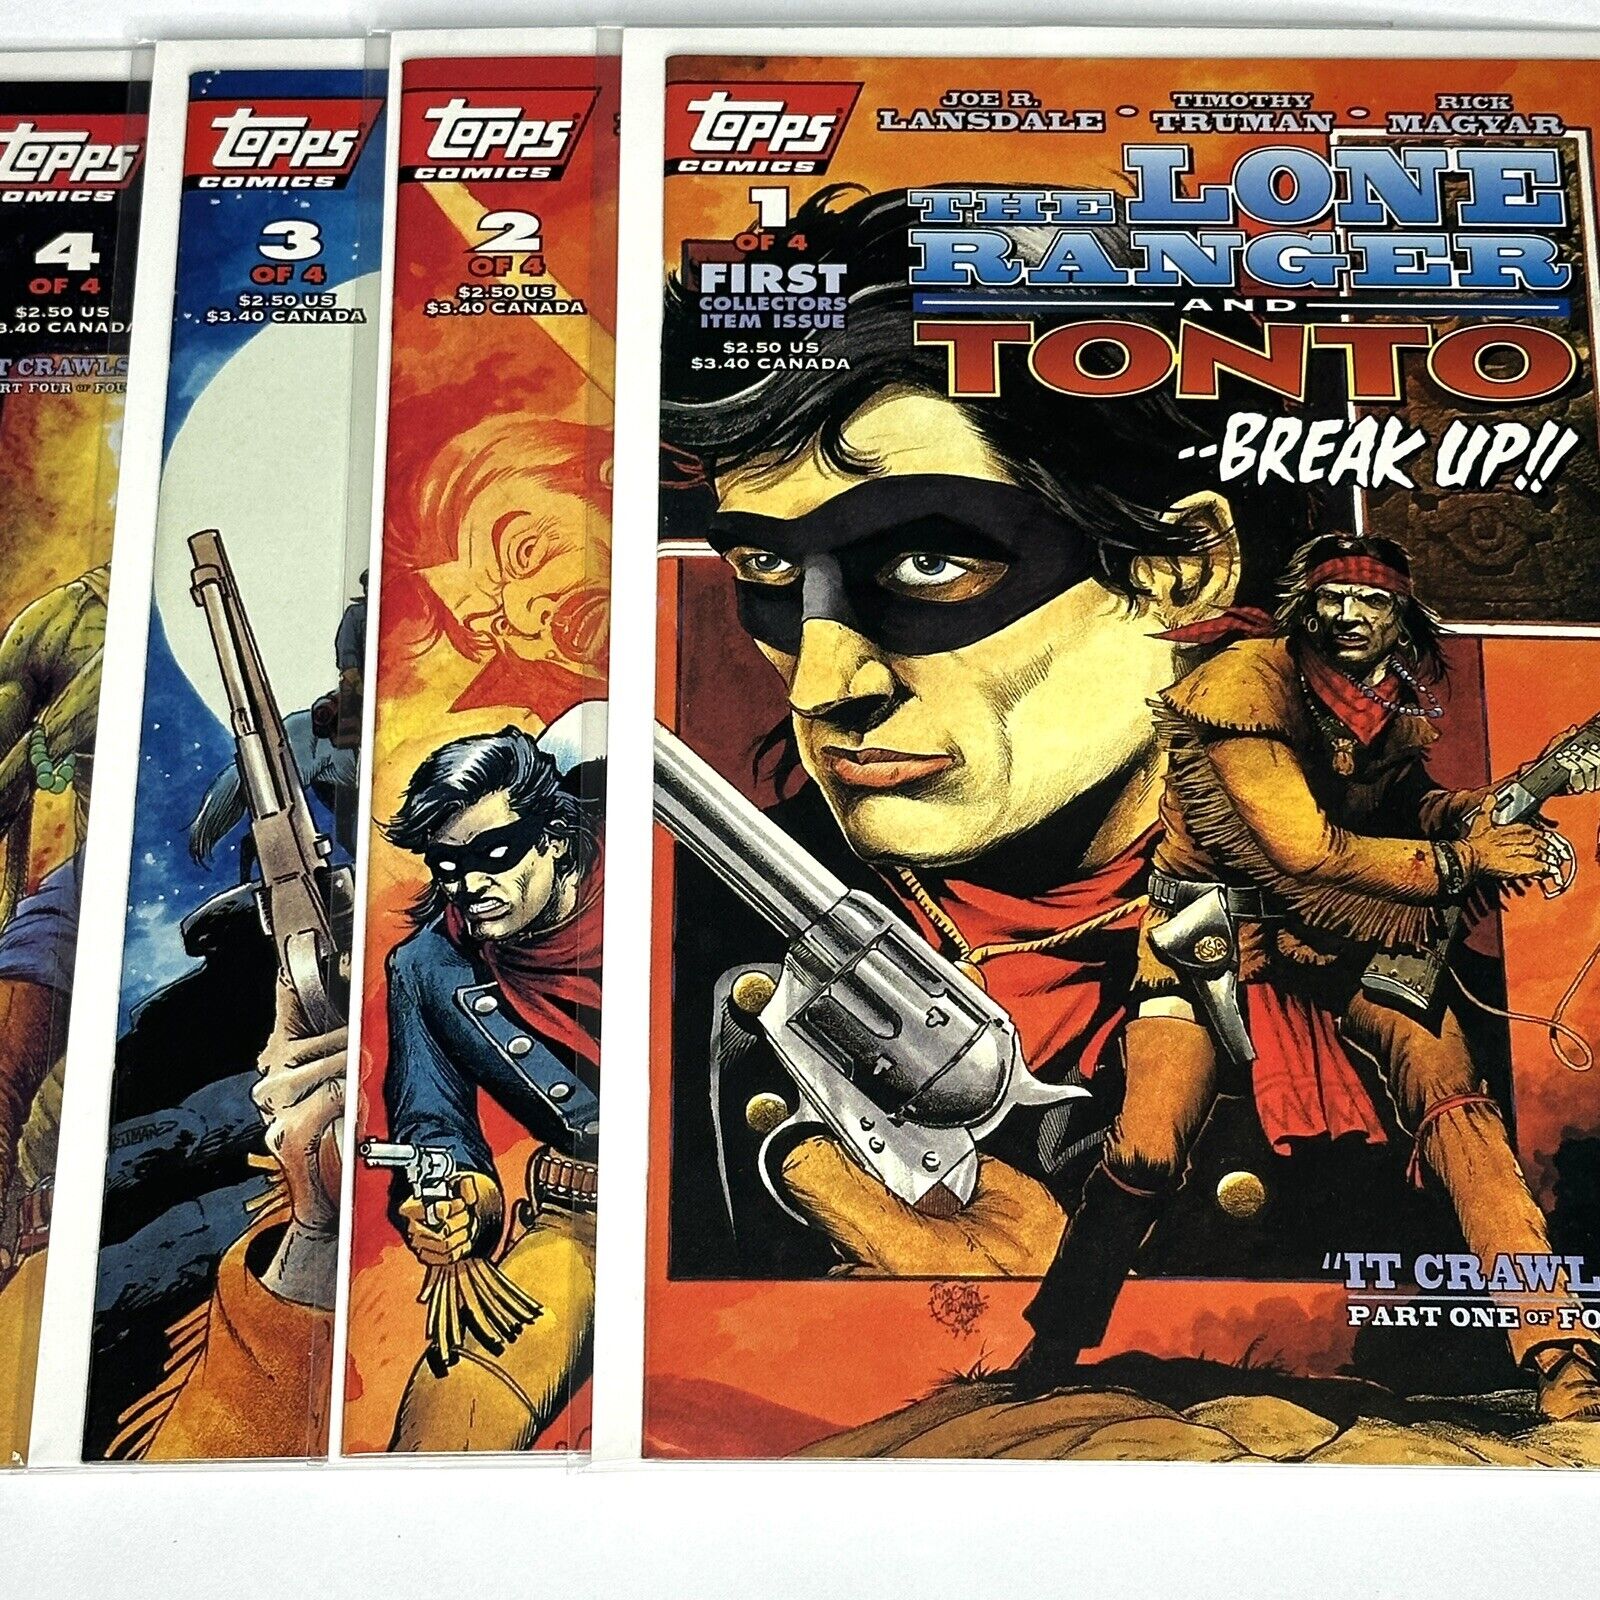 Topps Comics The Lone Ranger And Tonto Complete Series Run Issues 1-4 Lot VF/NM